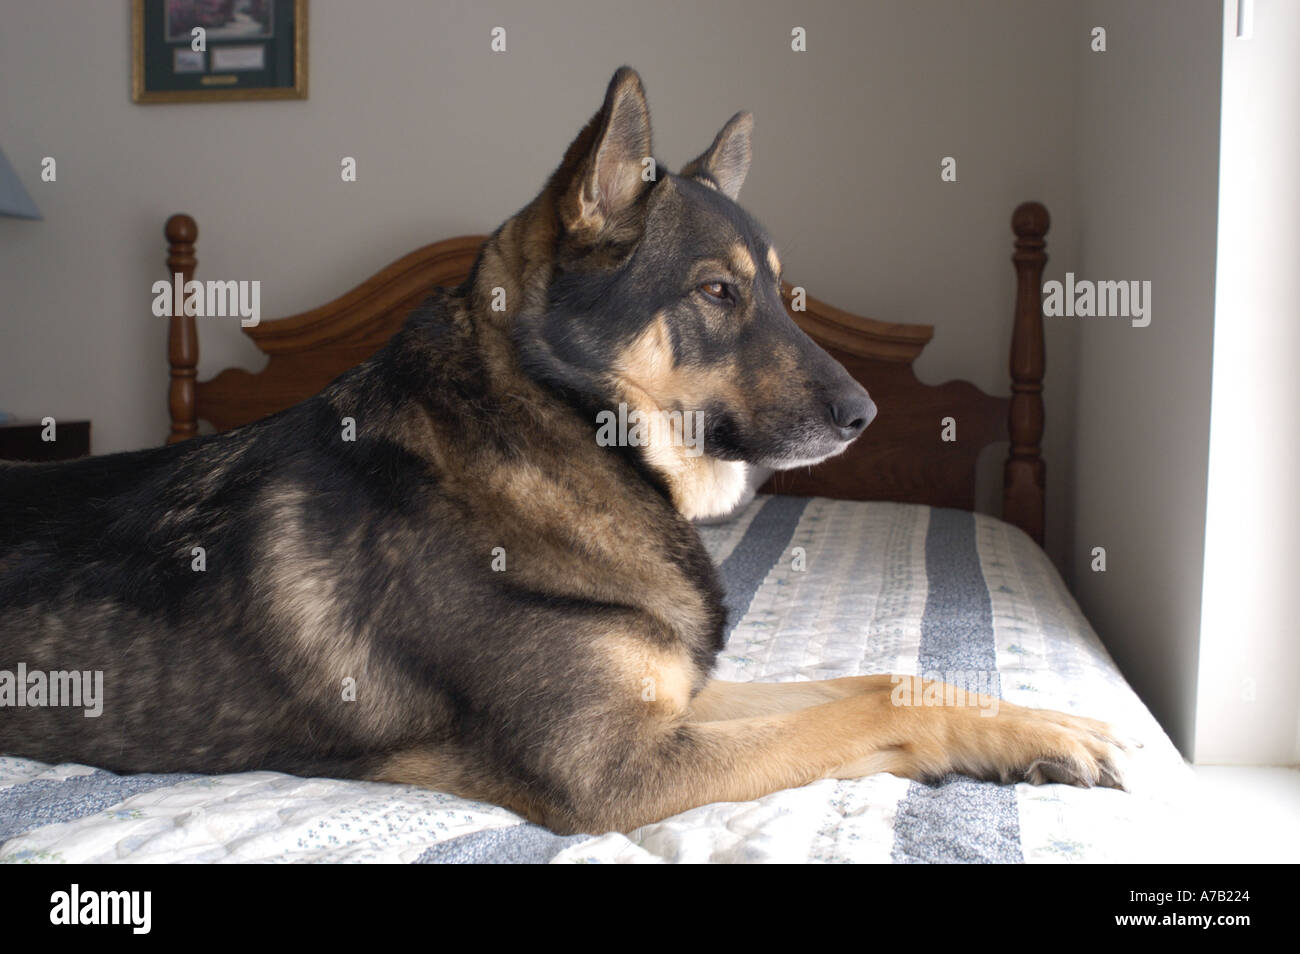 German Shepherd And Norwegian Elkhound Mix Dog On Bed Looking Out Stock Photo Alamy